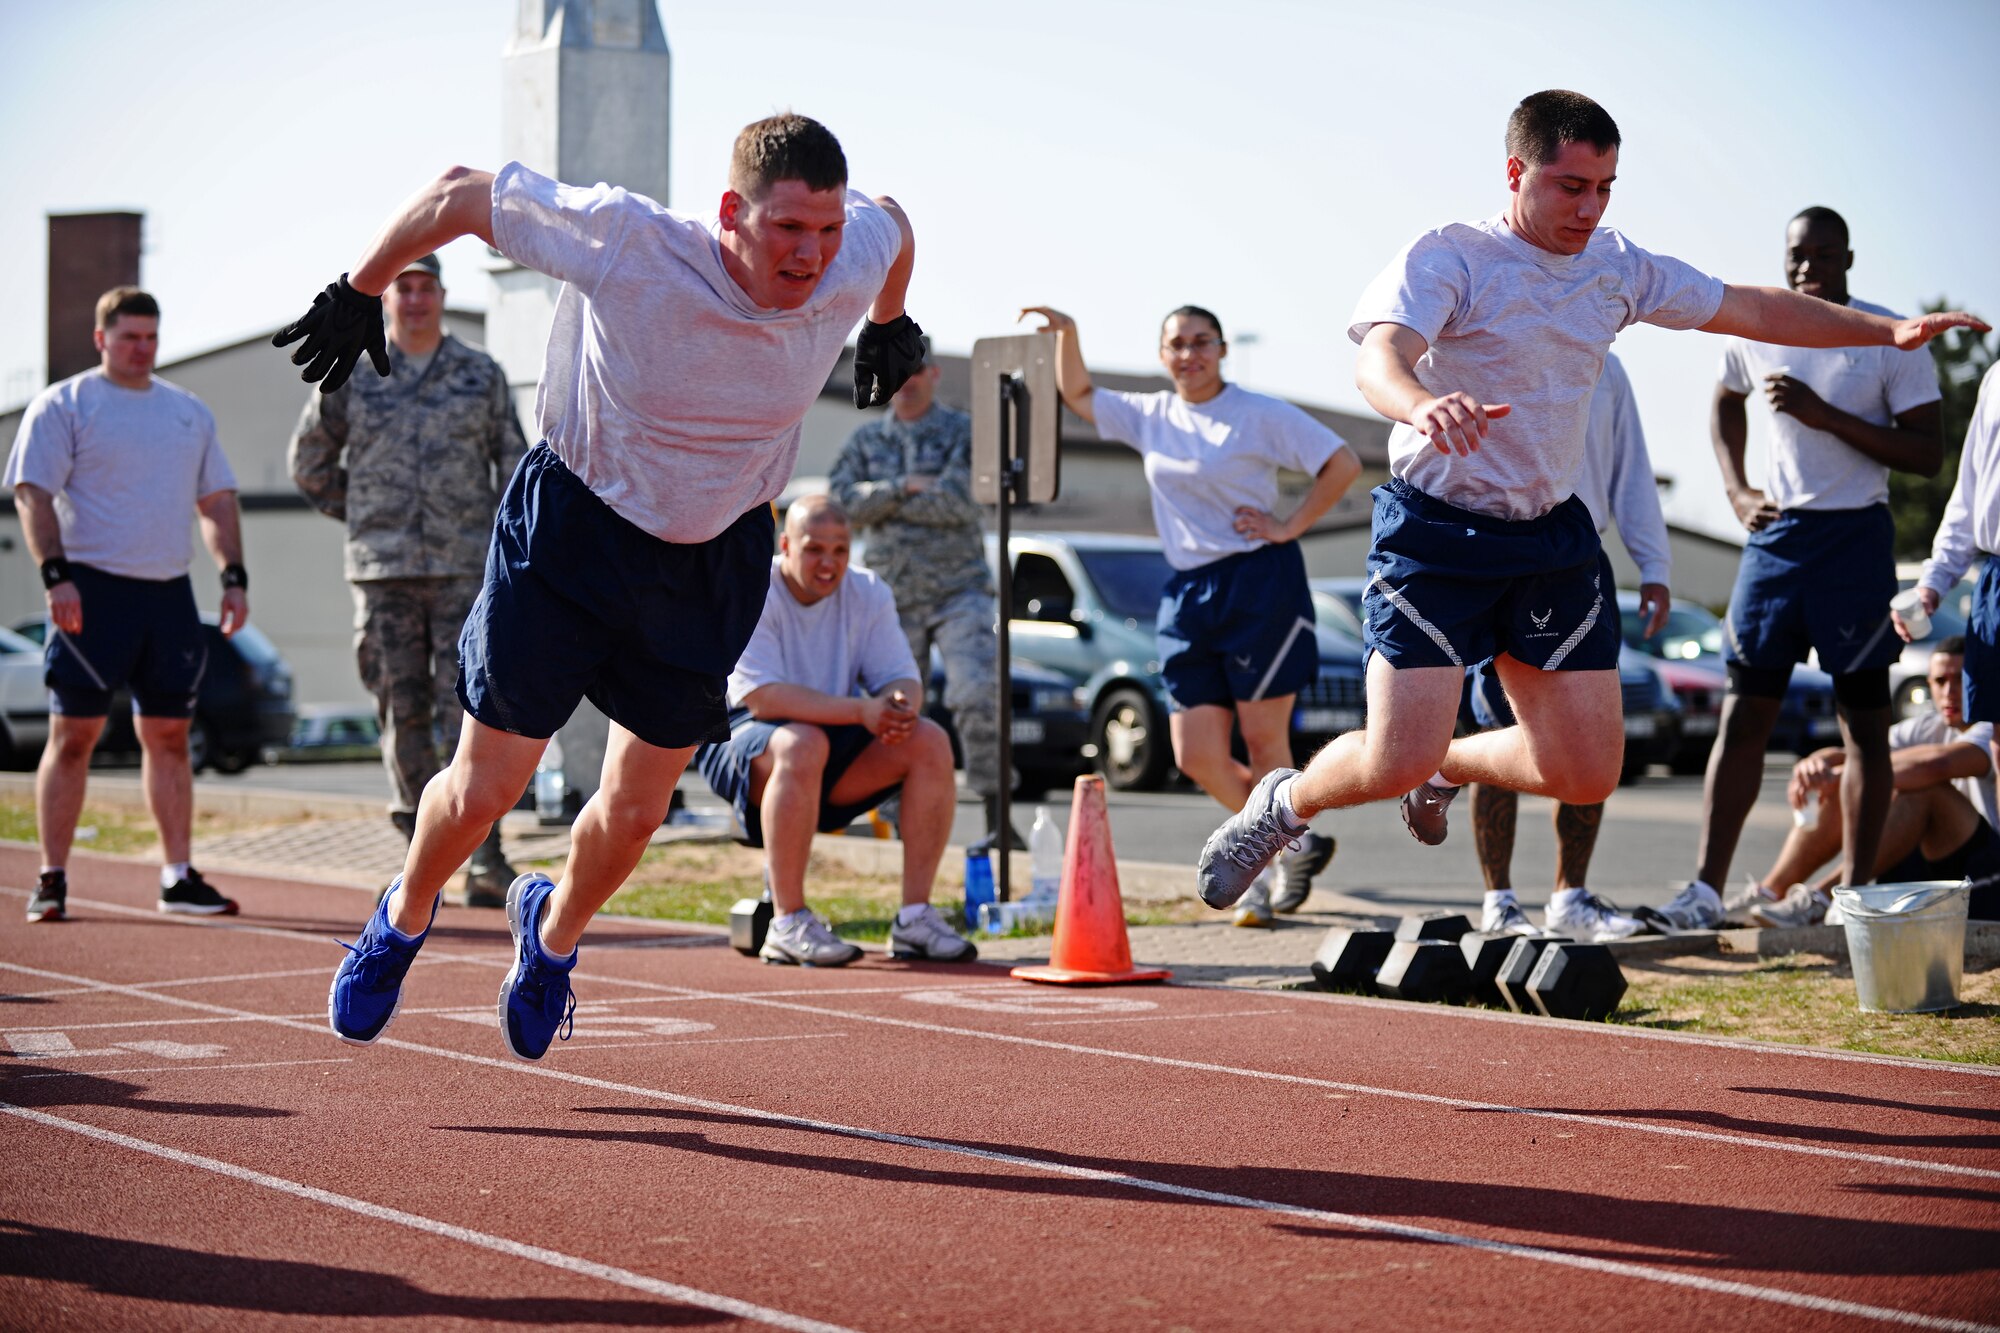 SPANGDAHLEM AIR BASE, Germany – Staff Sgt. Timmy Edge, left, 52nd Equipment Maintenance Squadron, and Tech. Sgt. Jason Quadros, 52nd Component Maintenance Squadron, long jump during a relay for the Iron Flight Competition at the track here March 28. The quarterly competition is an incentive program intended to build comraderie and test the mental and physical endurance of the participating squadron members. Four teams participated in the six-person team competition that consisted of three different events. The 52nd Equipment Maintenance Squadron ammo team won the competition after a three-way tie-breaker rope-climbing event against the 52nd Civil Engineer Squadron and CMS. (U.S. Air Force photo by Airman 1st Class Matthew B. Fredericks/Released)